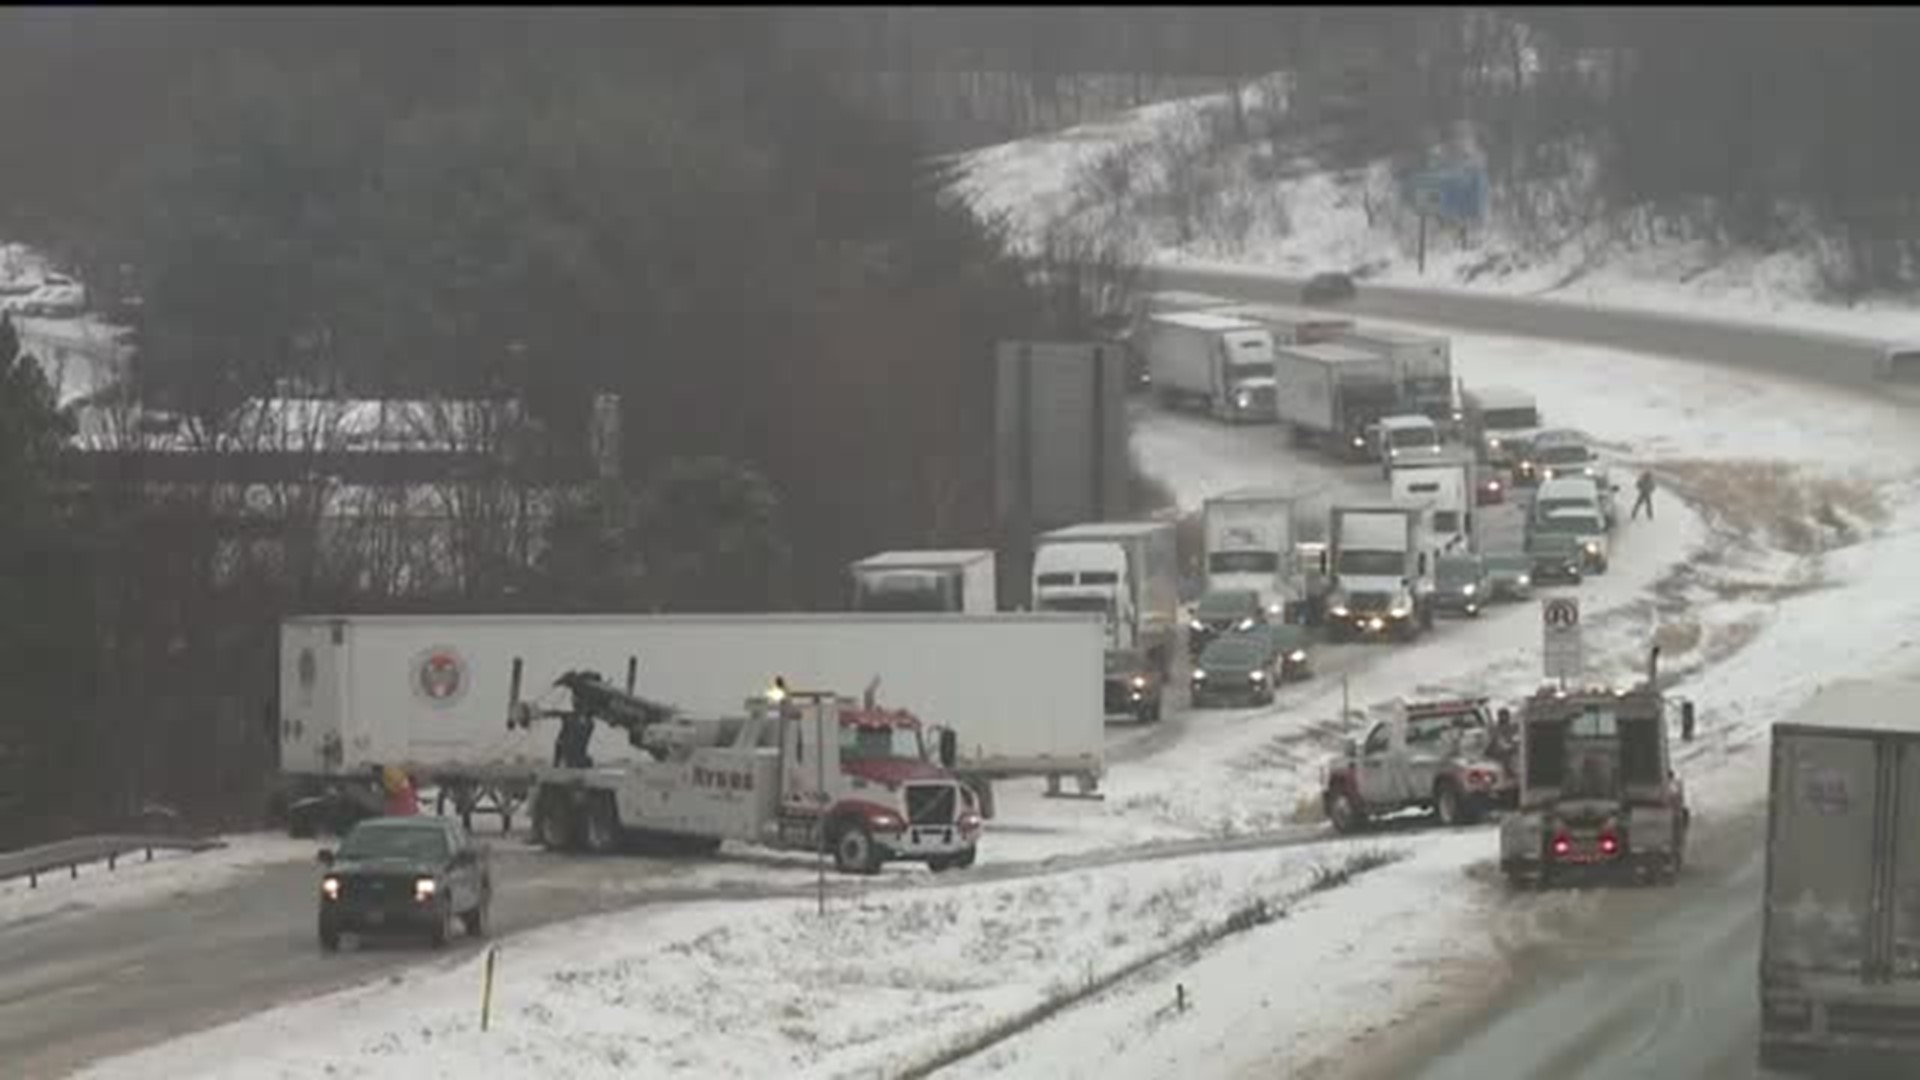 Interstate 81 in Luzerne County Open after Crash